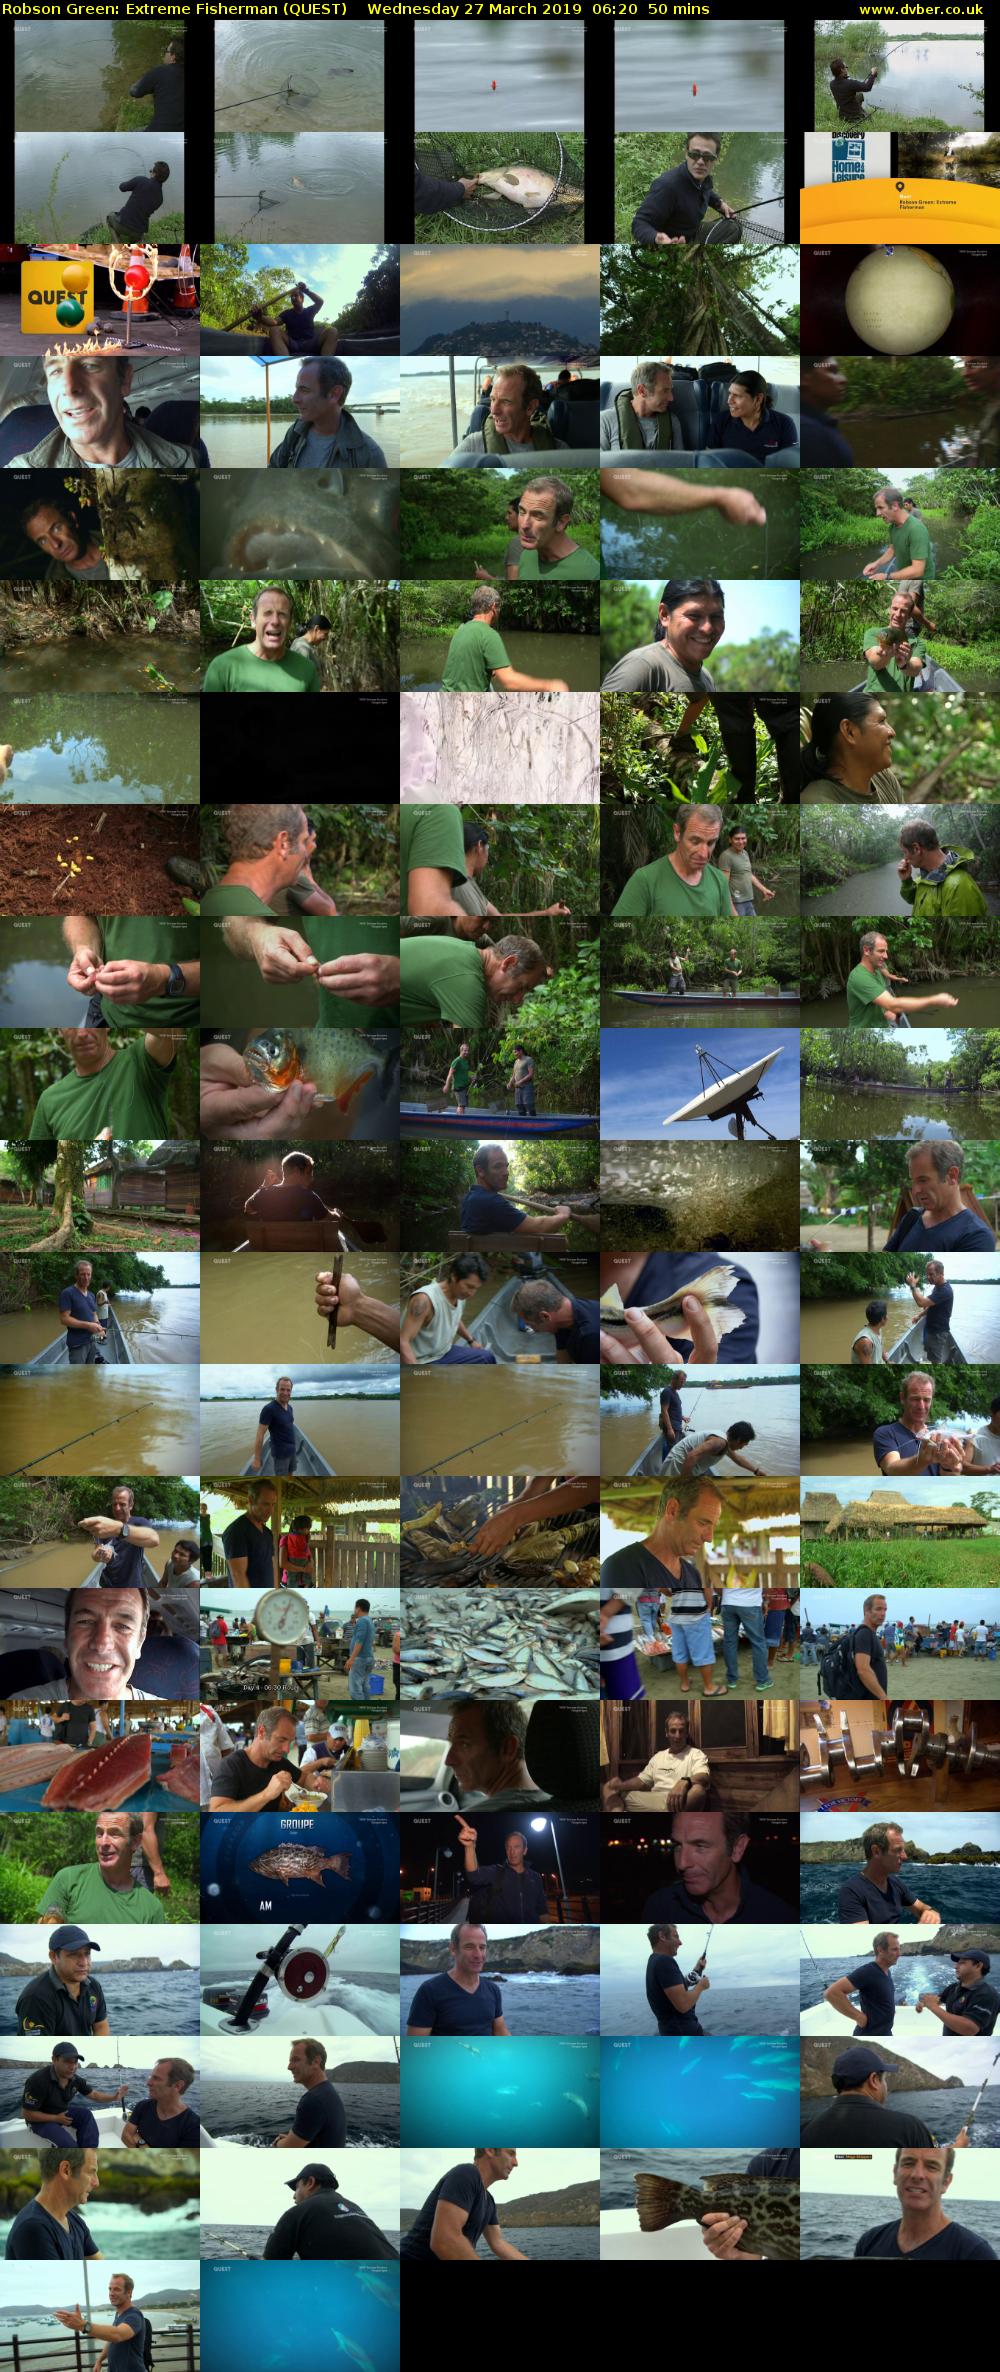 Robson Green: Extreme Fisherman (QUEST) Wednesday 27 March 2019 06:20 - 07:10